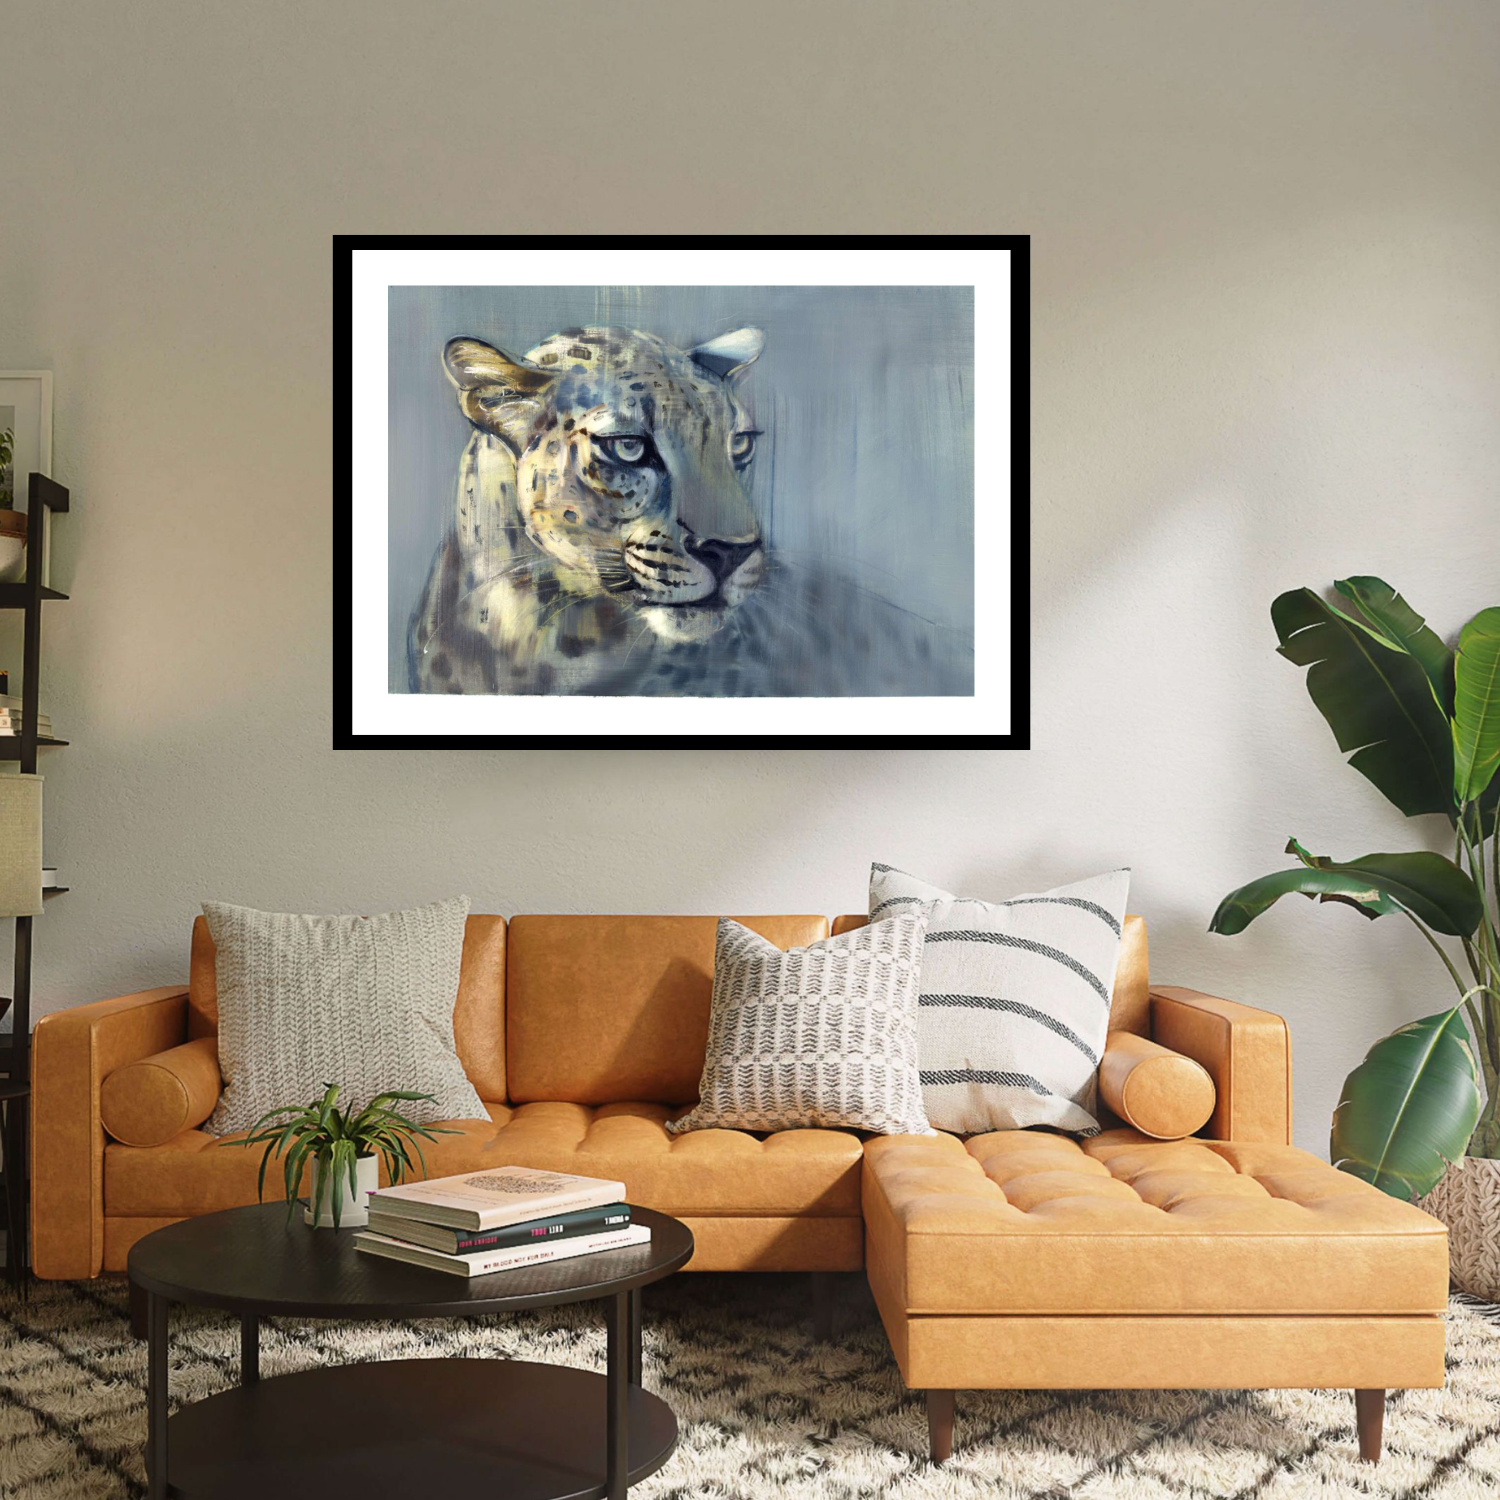 Black framed 'Predator II' by Mark Adlington. This artwork depicts an Arabian leopard with piercing eyes, blending seamlessly into its surroundings. Available as fine art prints, it's a captivating addition to any collection, capturing the elusive beauty of wildlife with stunning detail.